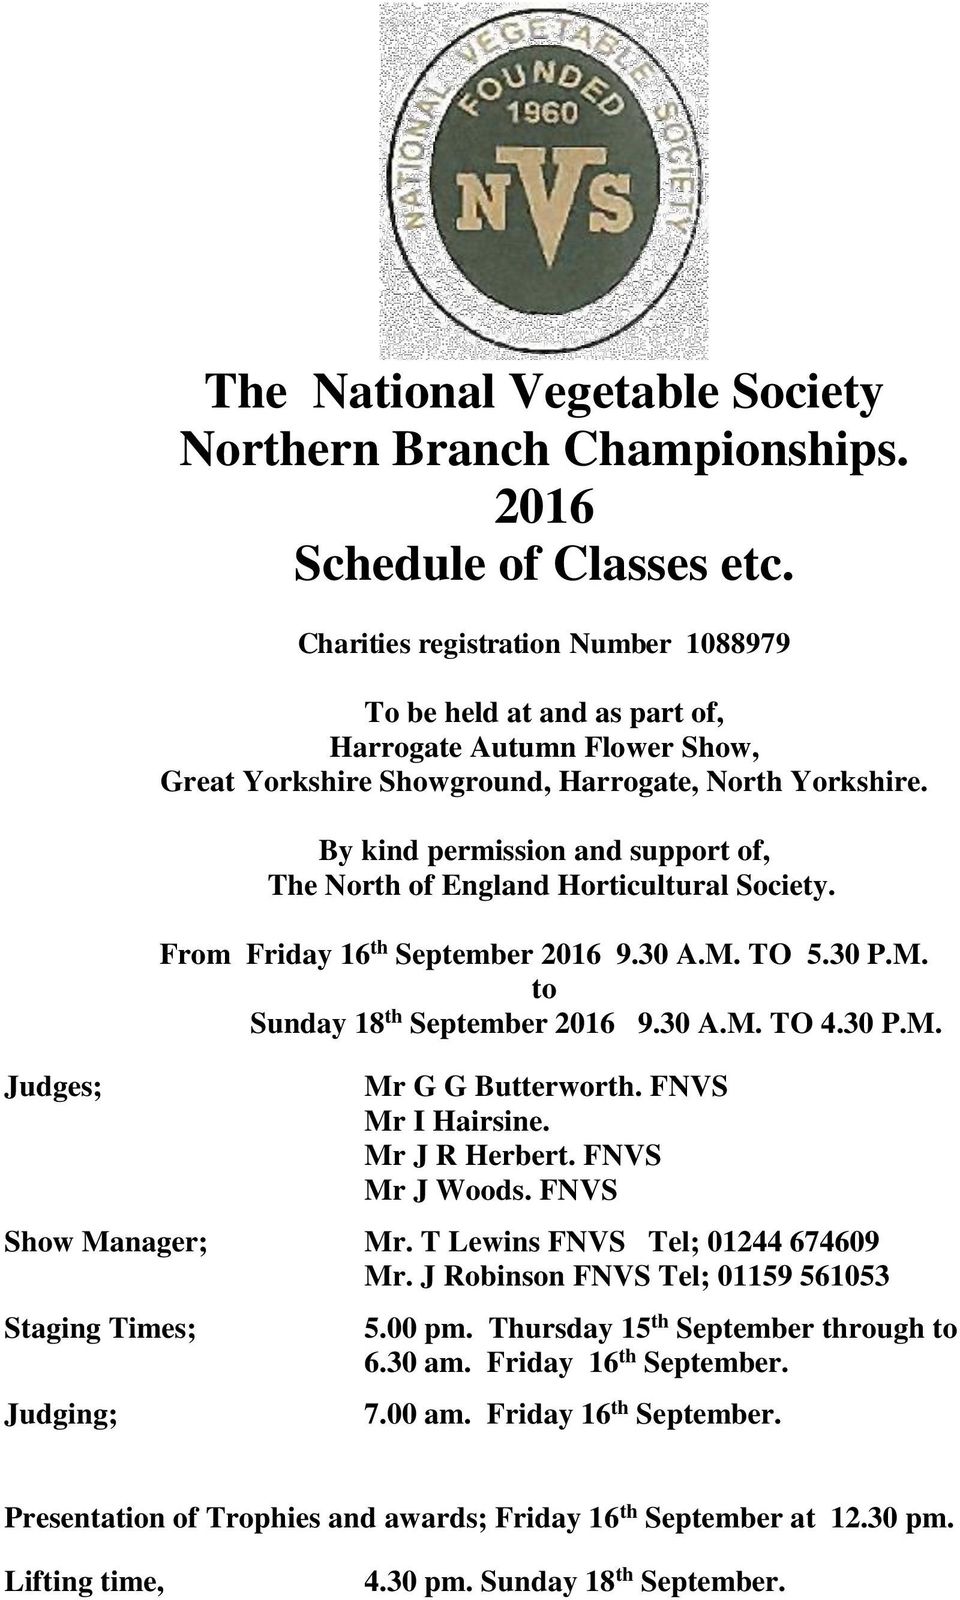 By kind permission and support of, The North of England Horticultural Society. From Friday 16 th September 2016 9.30 A.M. TO 5.30 P.M. to Sunday 18 th September 2016 9.30 A.M. TO 4.30 P.M. Mr G G Butterworth.